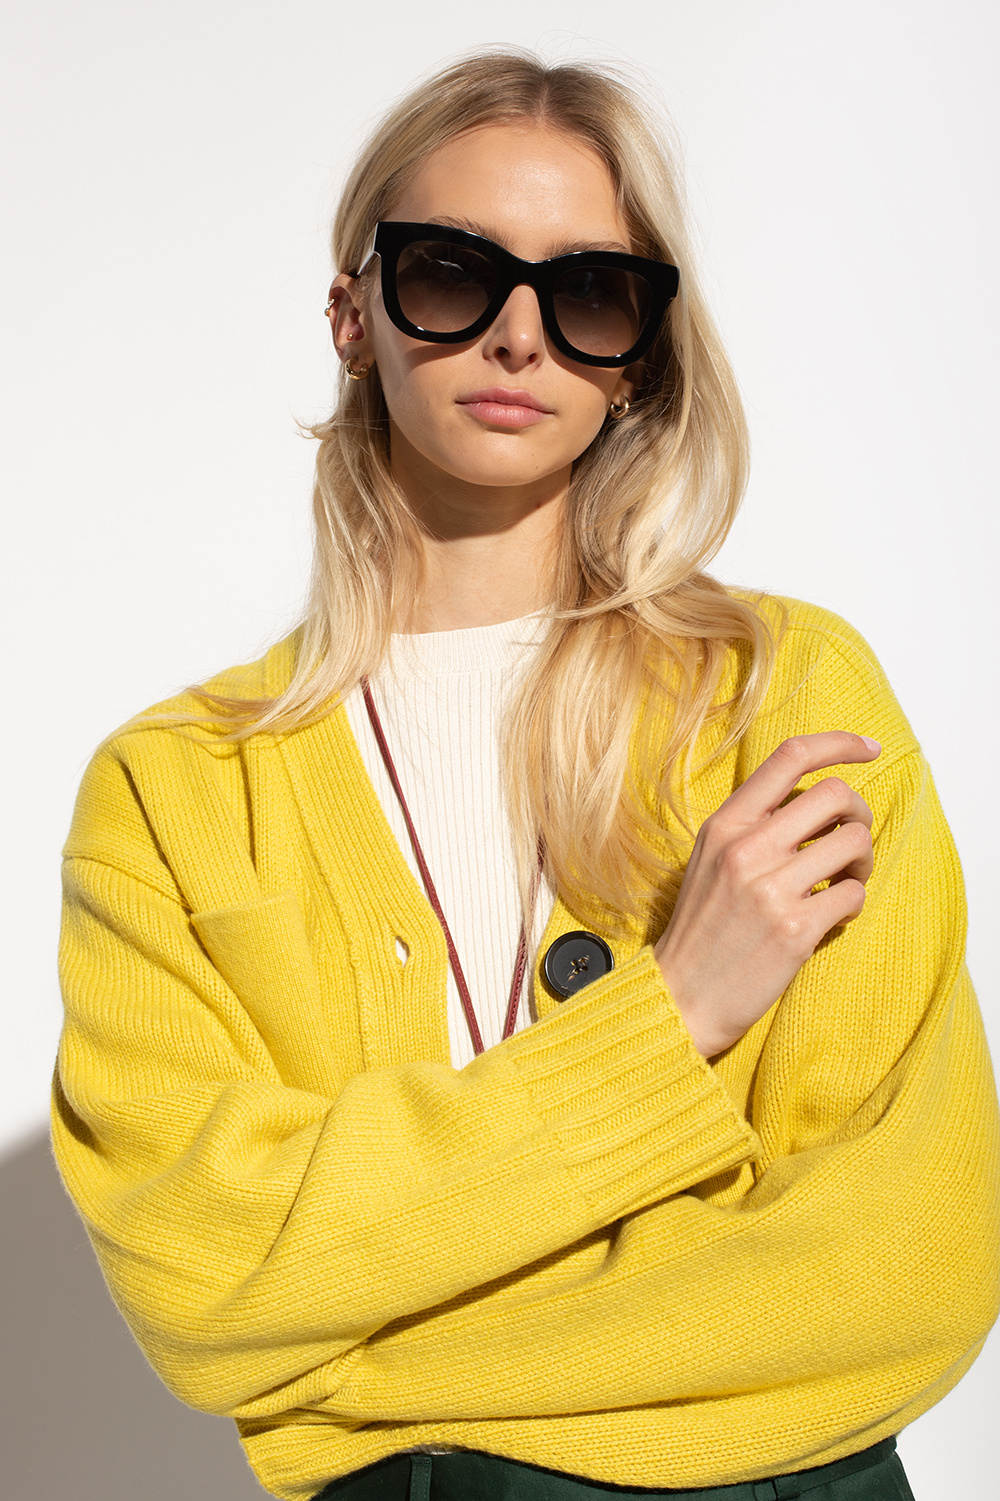 Thierry Lasry ‘Gambly’ sunglasses